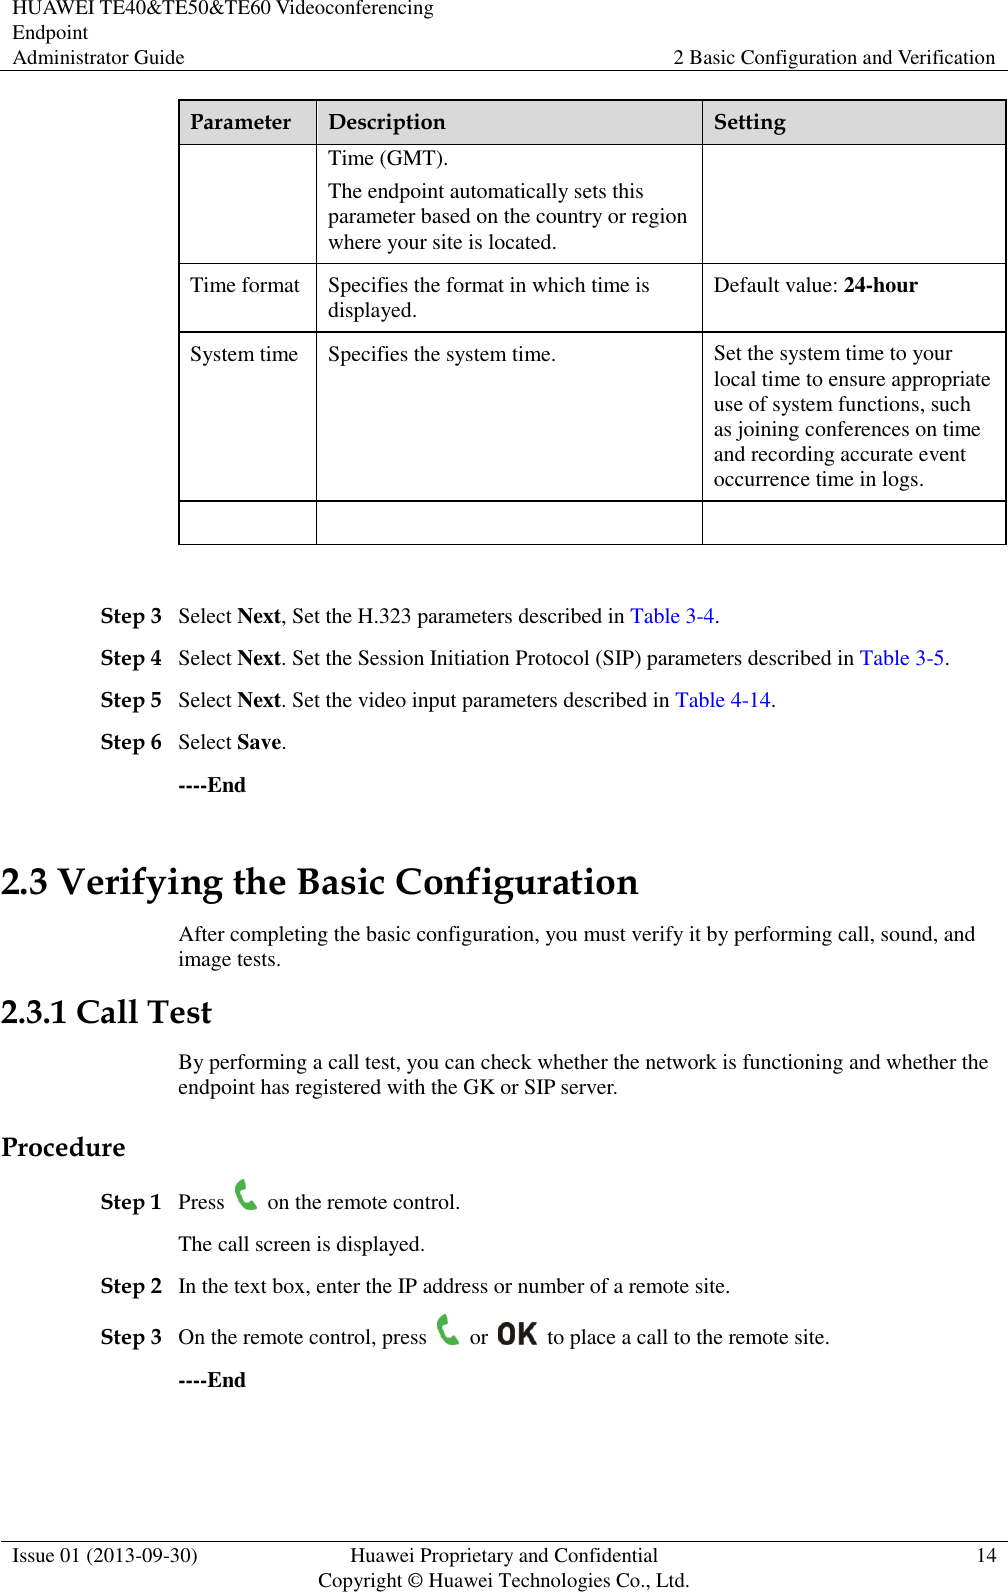 HUAWEI TE40&amp;TE50&amp;TE60 Videoconferencing Endpoint Administrator Guide 2 Basic Configuration and Verification  Issue 01 (2013-09-30) Huawei Proprietary and Confidential                                     Copyright © Huawei Technologies Co., Ltd. 14  Parameter Description Setting Time (GMT). The endpoint automatically sets this parameter based on the country or region where your site is located. Time format Specifies the format in which time is displayed.   Default value: 24-hour System time Specifies the system time.   Set the system time to your local time to ensure appropriate use of system functions, such as joining conferences on time and recording accurate event occurrence time in logs.       Step 3 Select Next, Set the H.323 parameters described in Table 3-4. Step 4 Select Next. Set the Session Initiation Protocol (SIP) parameters described in Table 3-5. Step 5 Select Next. Set the video input parameters described in Table 4-14. Step 6 Select Save. ----End 2.3 Verifying the Basic Configuration After completing the basic configuration, you must verify it by performing call, sound, and image tests. 2.3.1 Call Test By performing a call test, you can check whether the network is functioning and whether the endpoint has registered with the GK or SIP server. Procedure Step 1 Press    on the remote control. The call screen is displayed. Step 2 In the text box, enter the IP address or number of a remote site. Step 3 On the remote control, press    or    to place a call to the remote site. ----End 